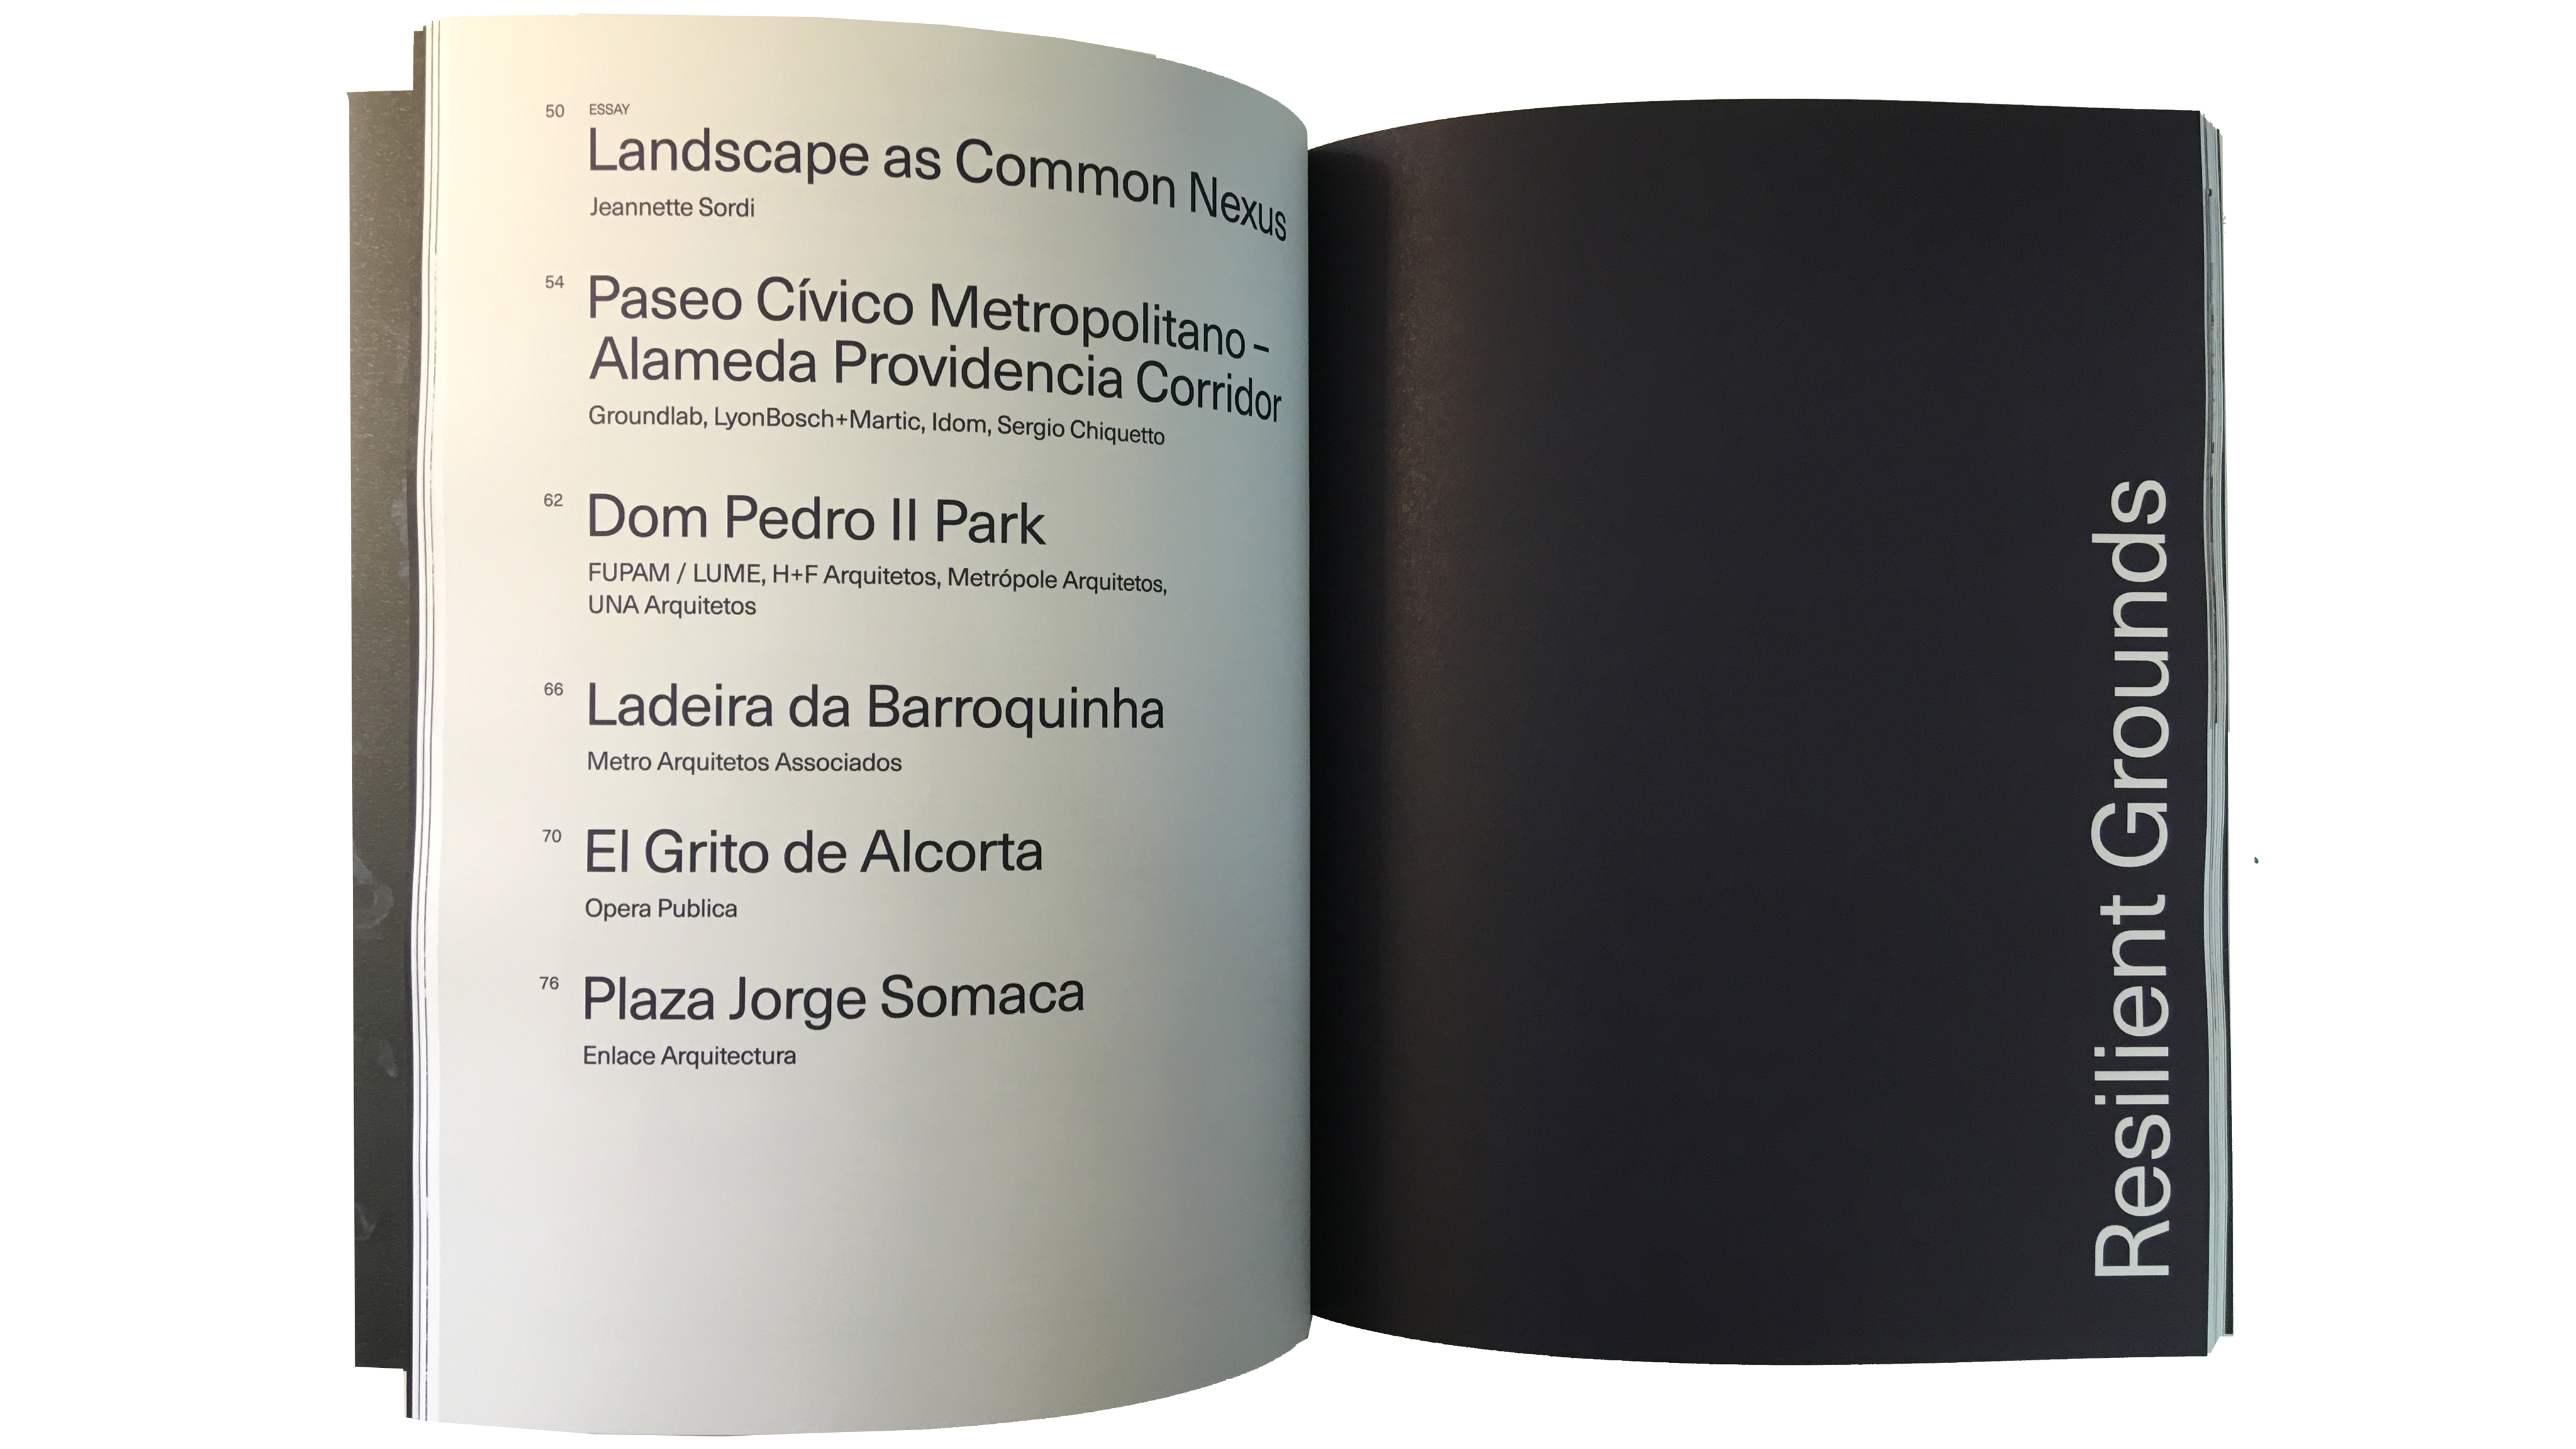 NESS.doc 2 Landscape as Urbanism in the Americas